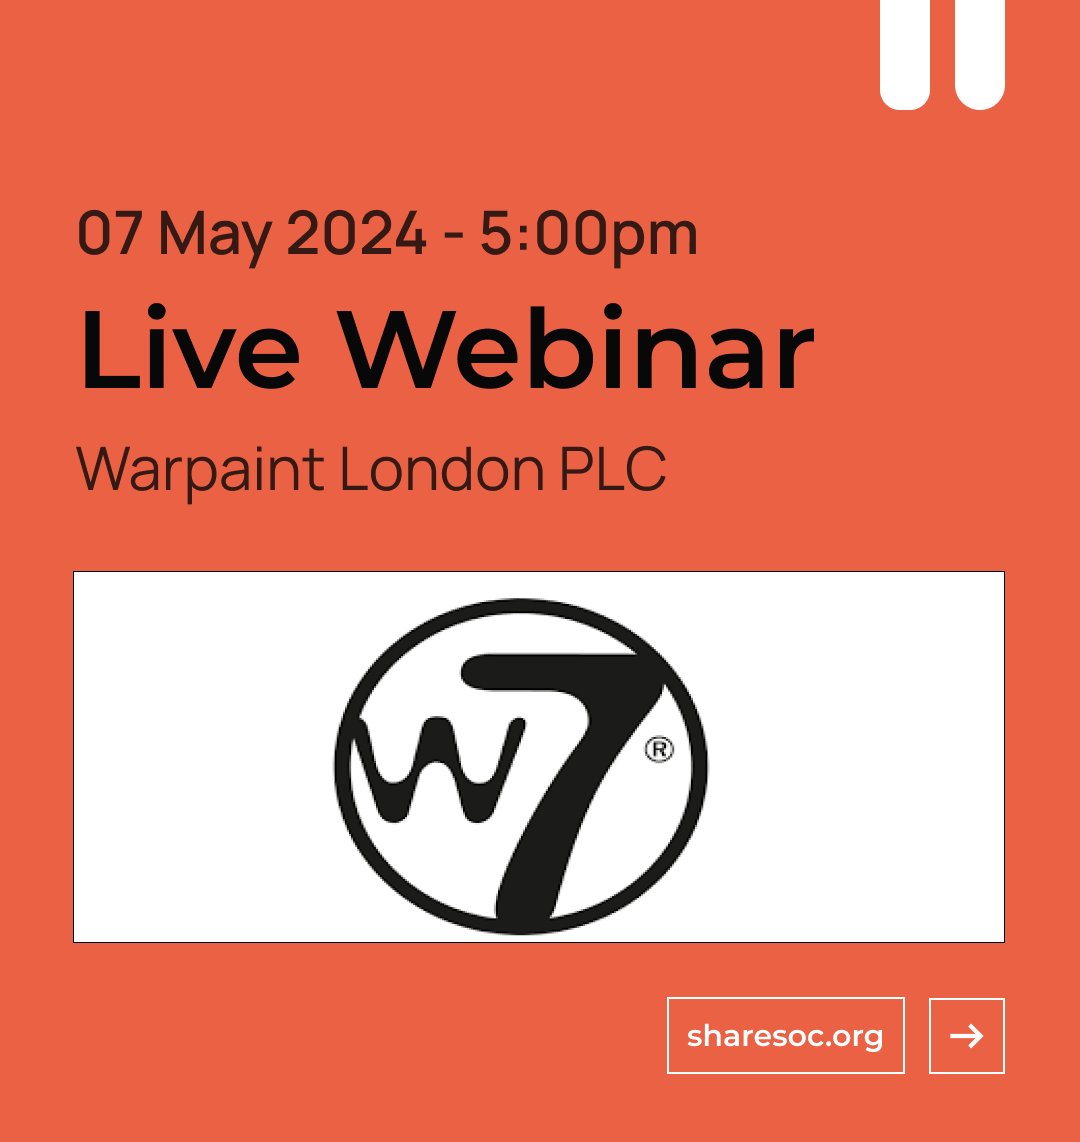 ShareSoc Webinar with Warpaint London PLC #W7L  07/5/24 5:00pm. Sam Bazini, Chief Executive Officer will be conducting an investor presentation covering their final results.  👉 𝗥𝗲𝗴𝗶𝘀𝘁𝗲𝗿 𝗻𝗼𝘄 bit.ly/3y6aaZJ  #Investing #Insights #Portfolio #Strategy